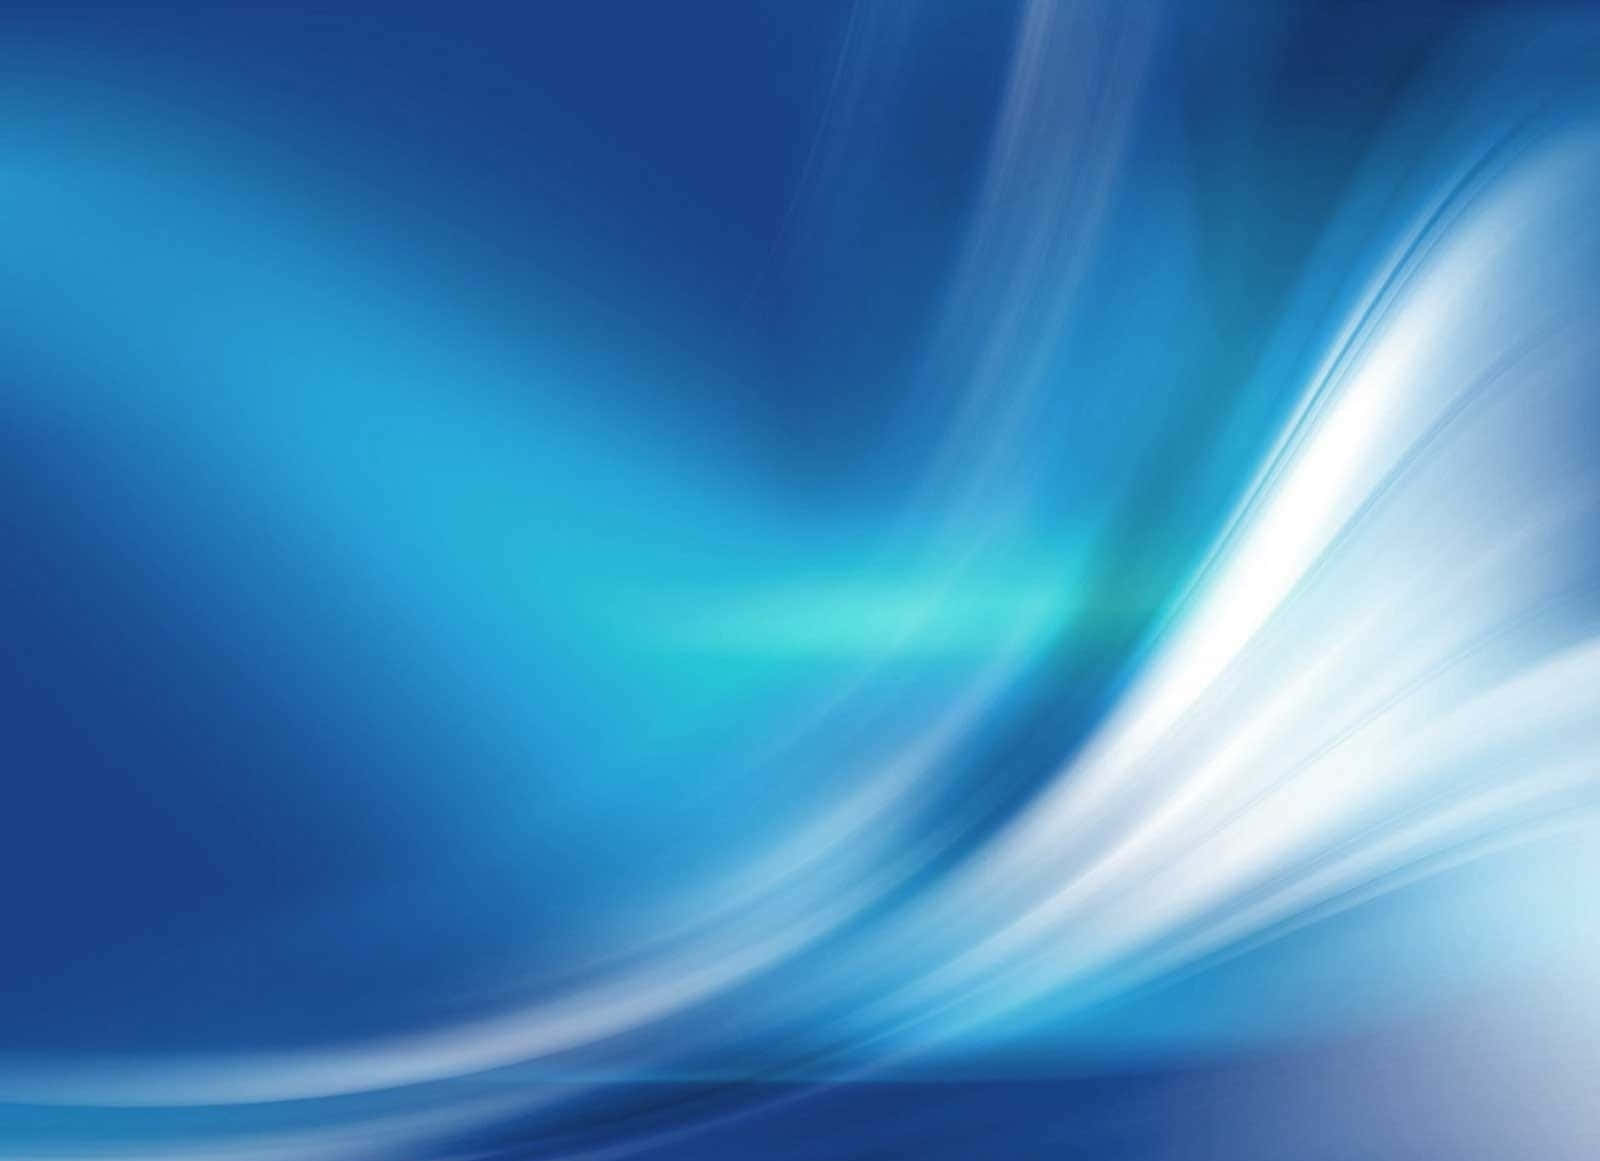 Blue Abstract Background With Waves